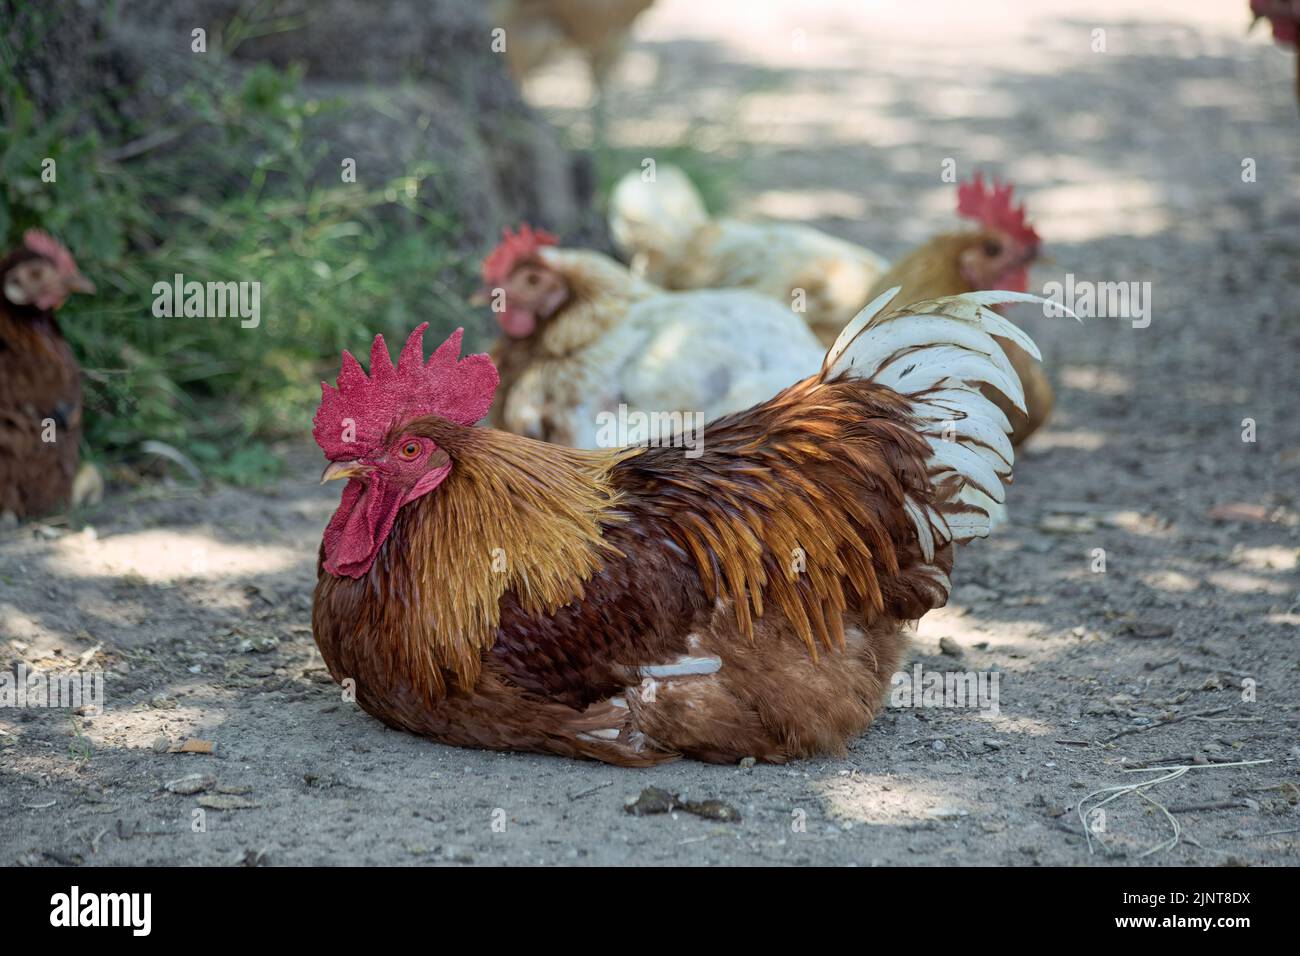 Free range rooster with beautiful feathers fowl on the ground. Stock Photo